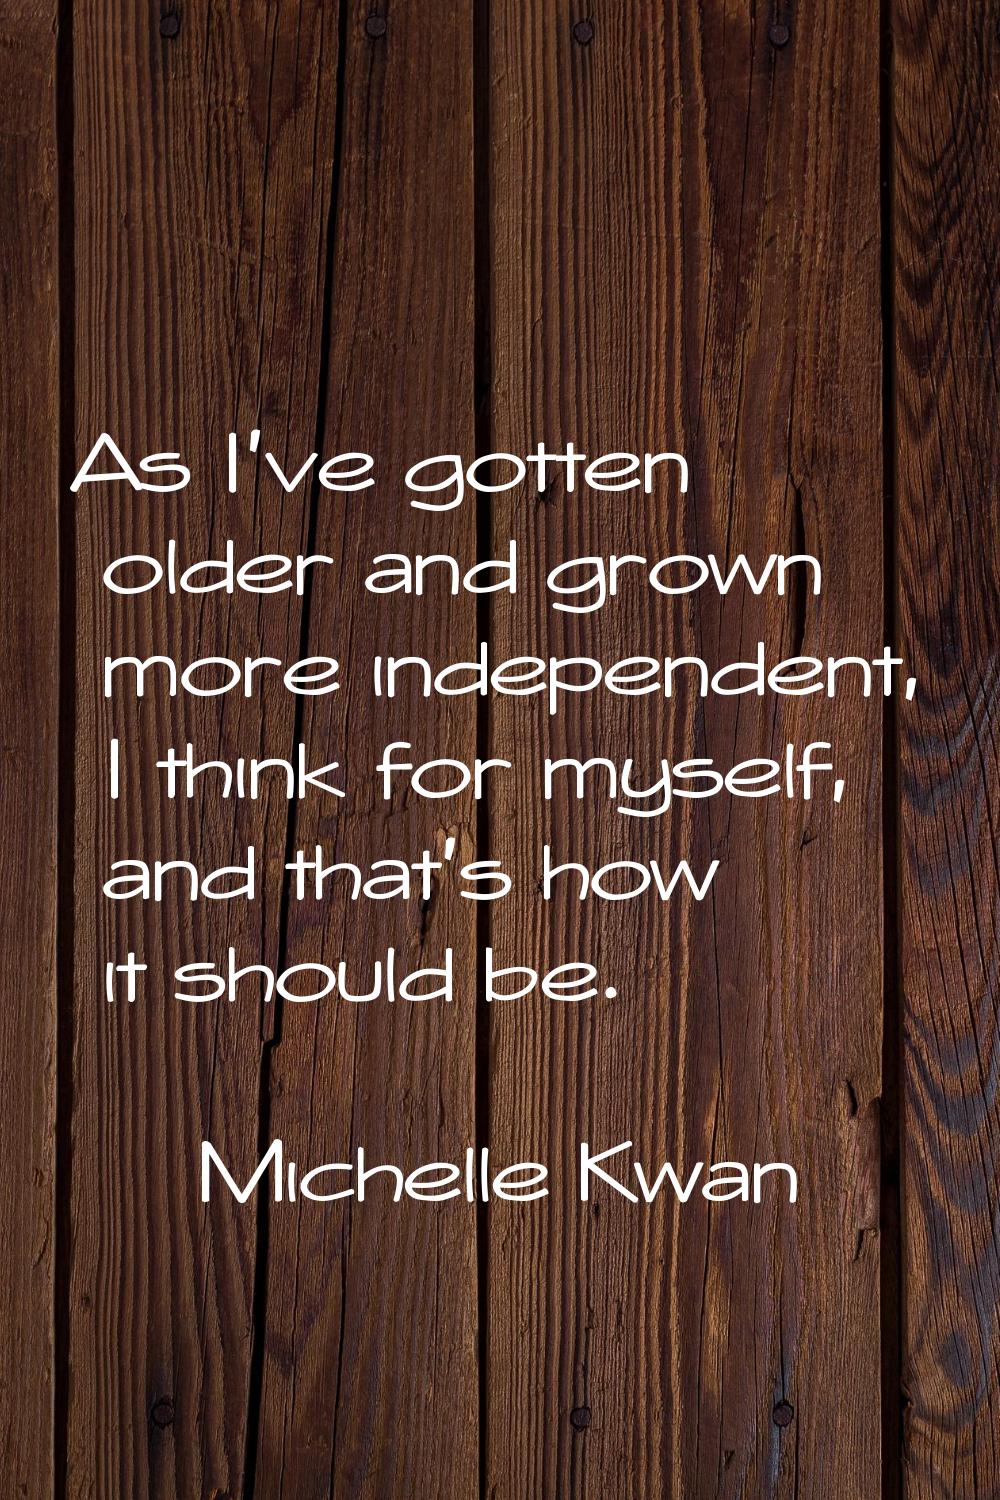 As I've gotten older and grown more independent, I think for myself, and that's how it should be.